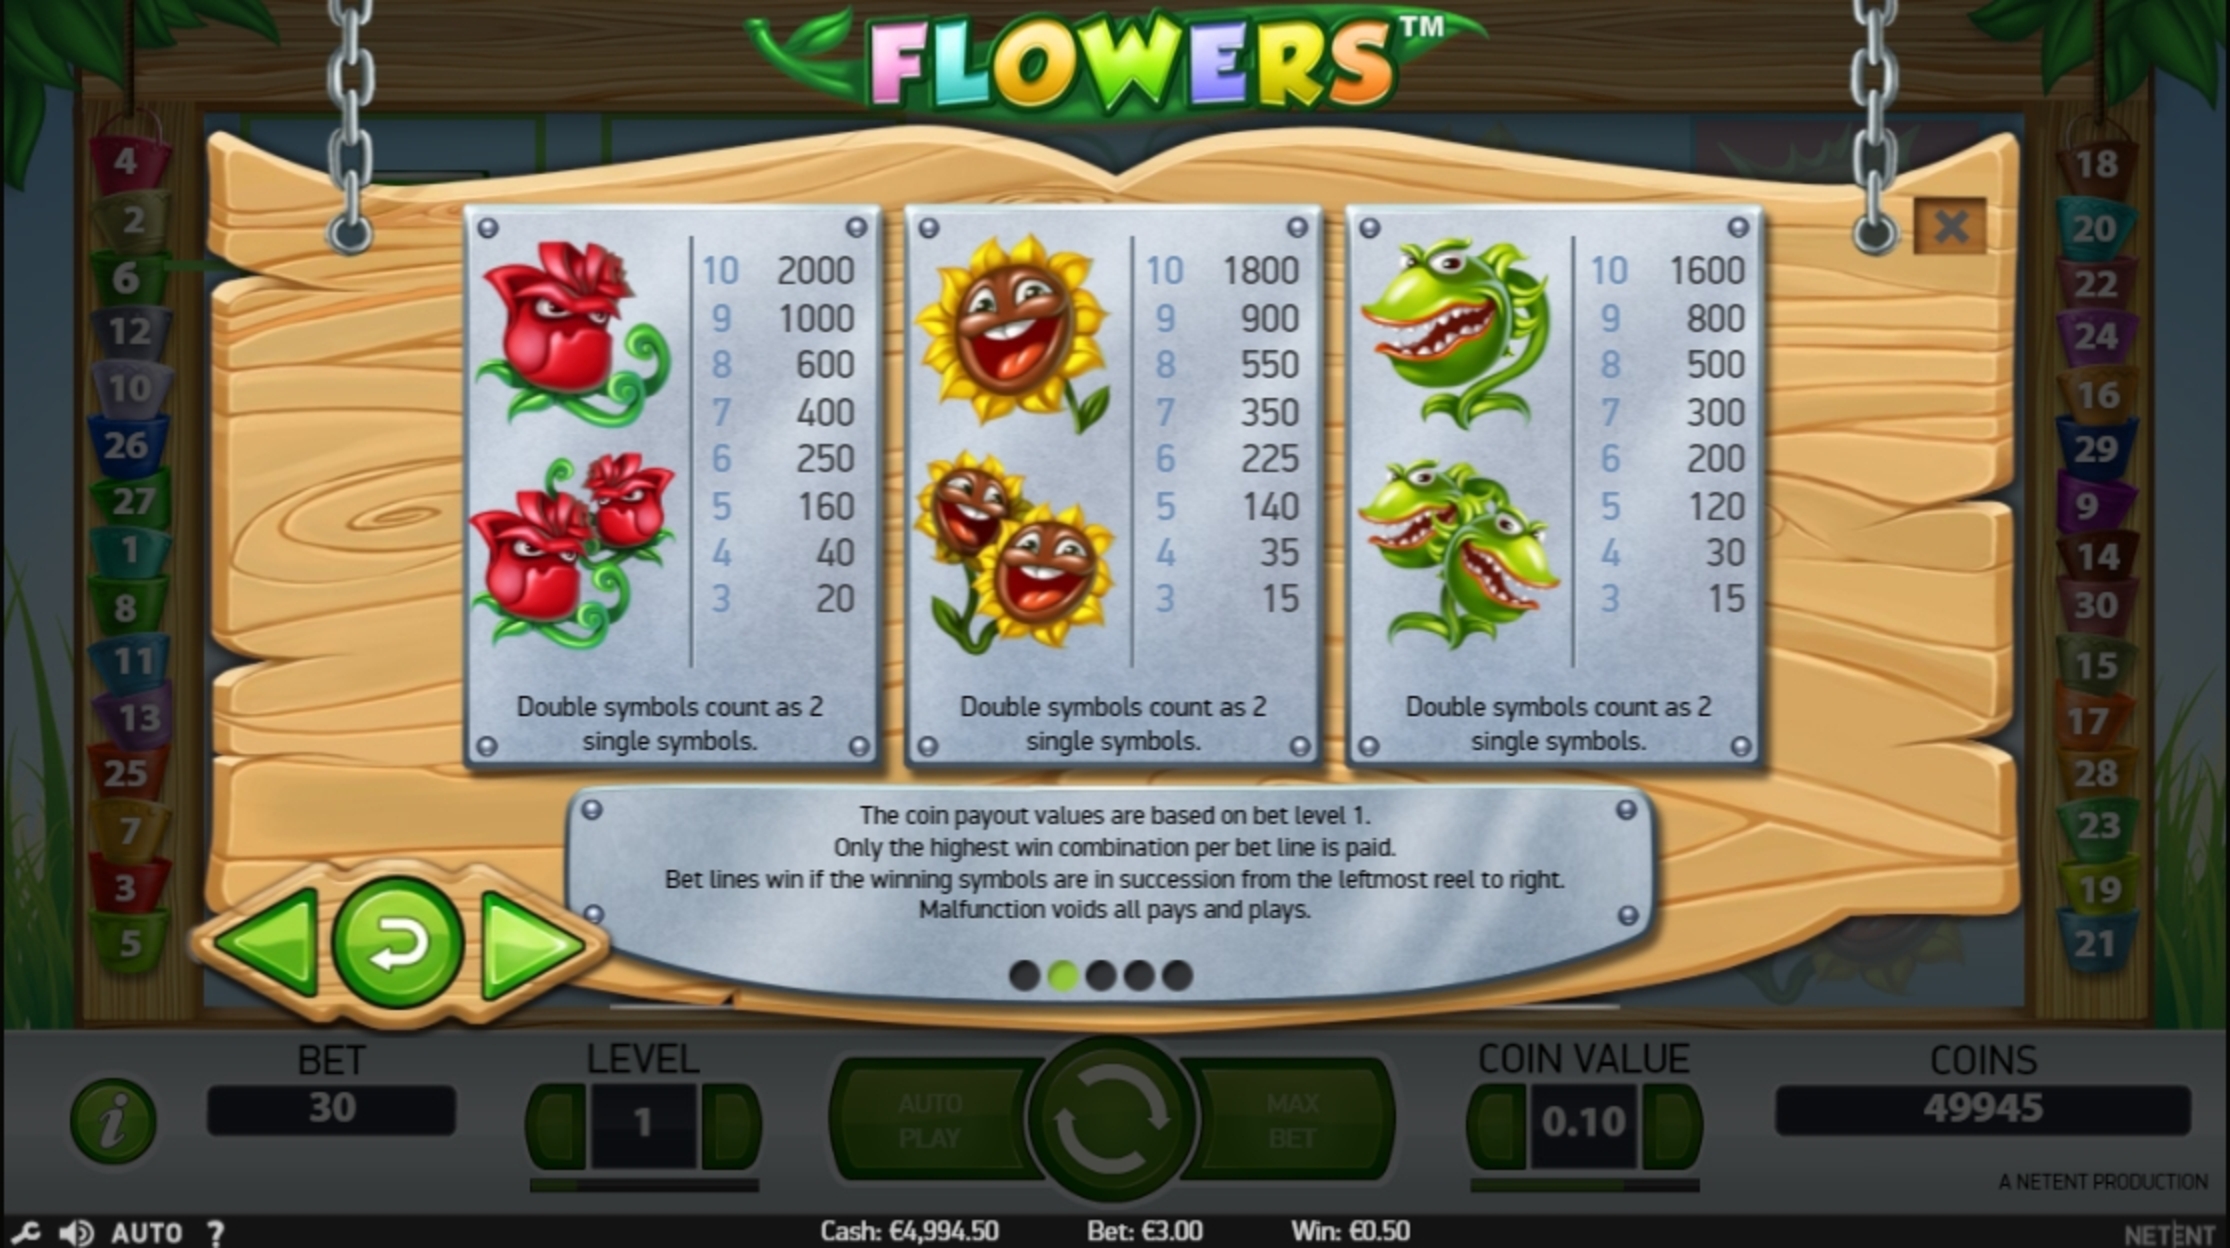 Info of Flowers Slot Game by NetEnt